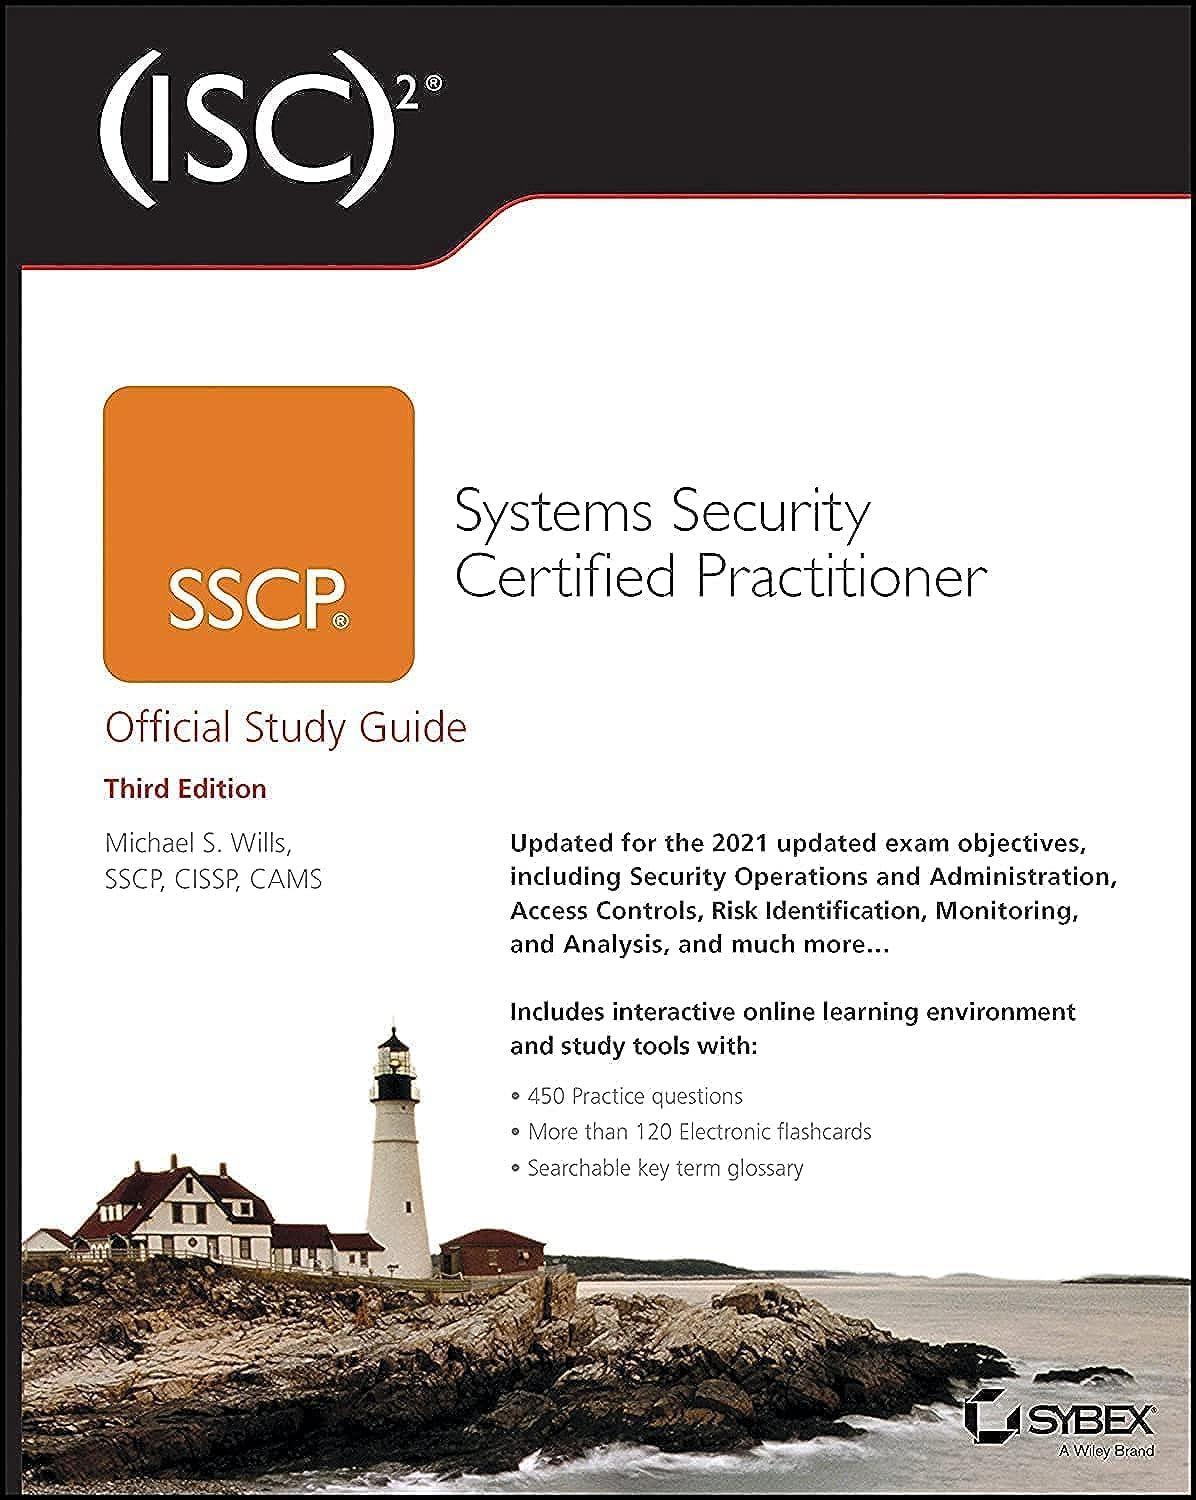 (isc)2 sscp systems security certified practitioner official study guide 3rd edition mike wills 1119854989,